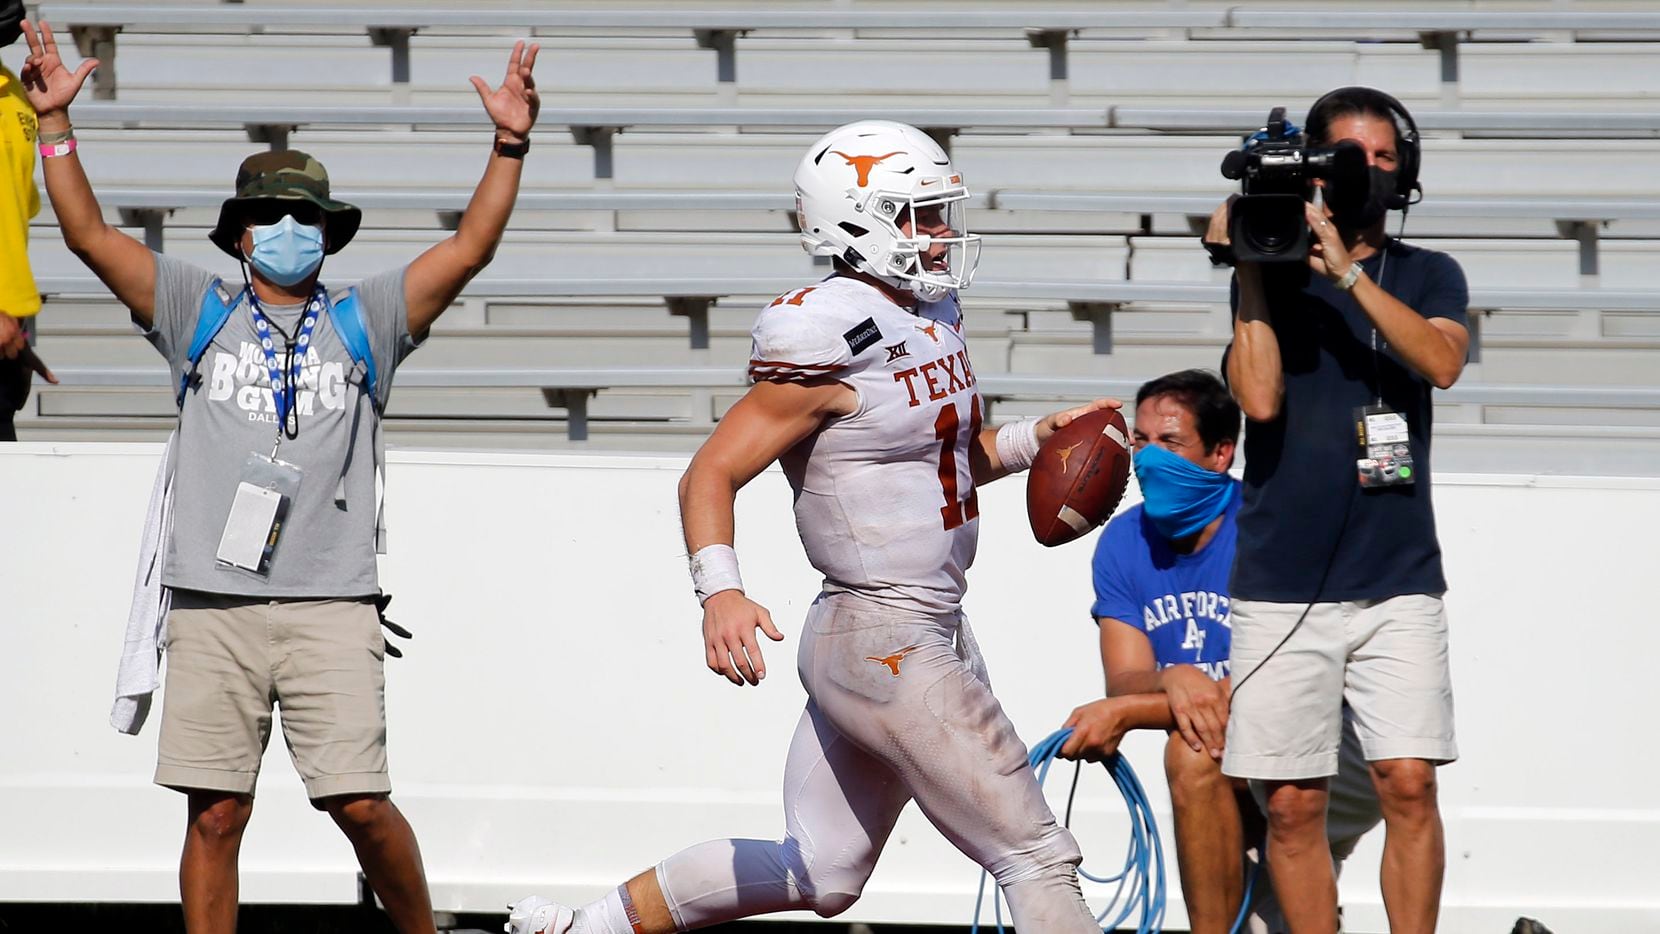 Texas quarterback Sam Ehlinger (11) scores a touchdown during the second overtime against Oklahoma in the Red River Showdown at the Cotton Bowl in Dallas on Saturday, Oct. 10, 2020.